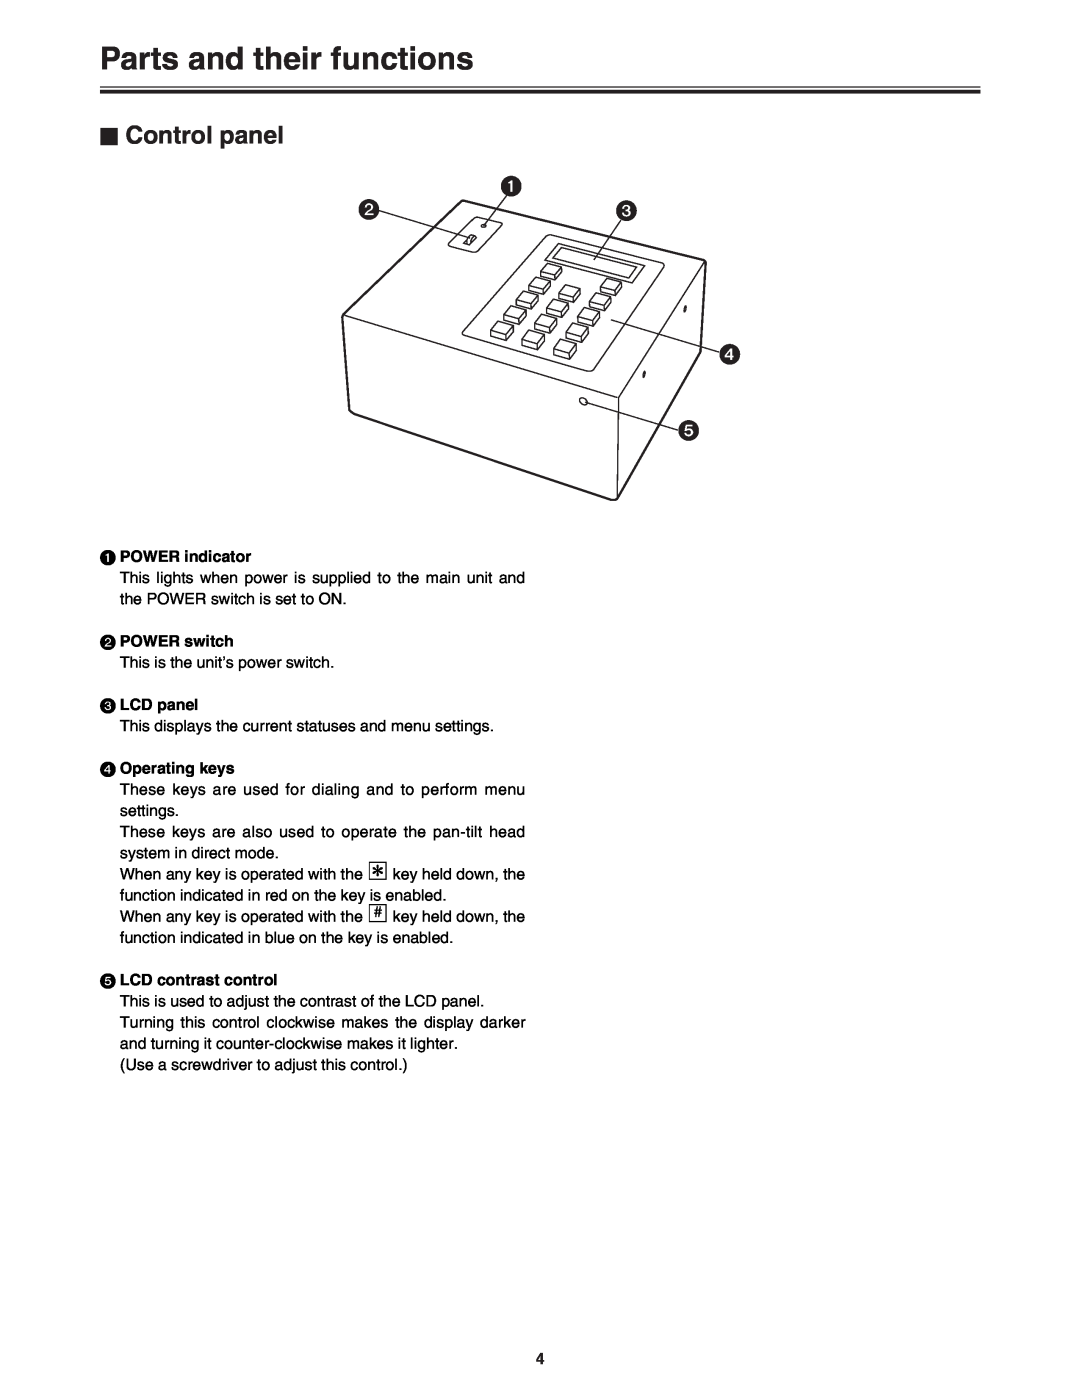 Panasonic AW-DU600 manual Parts and their functions, $ Control panel 